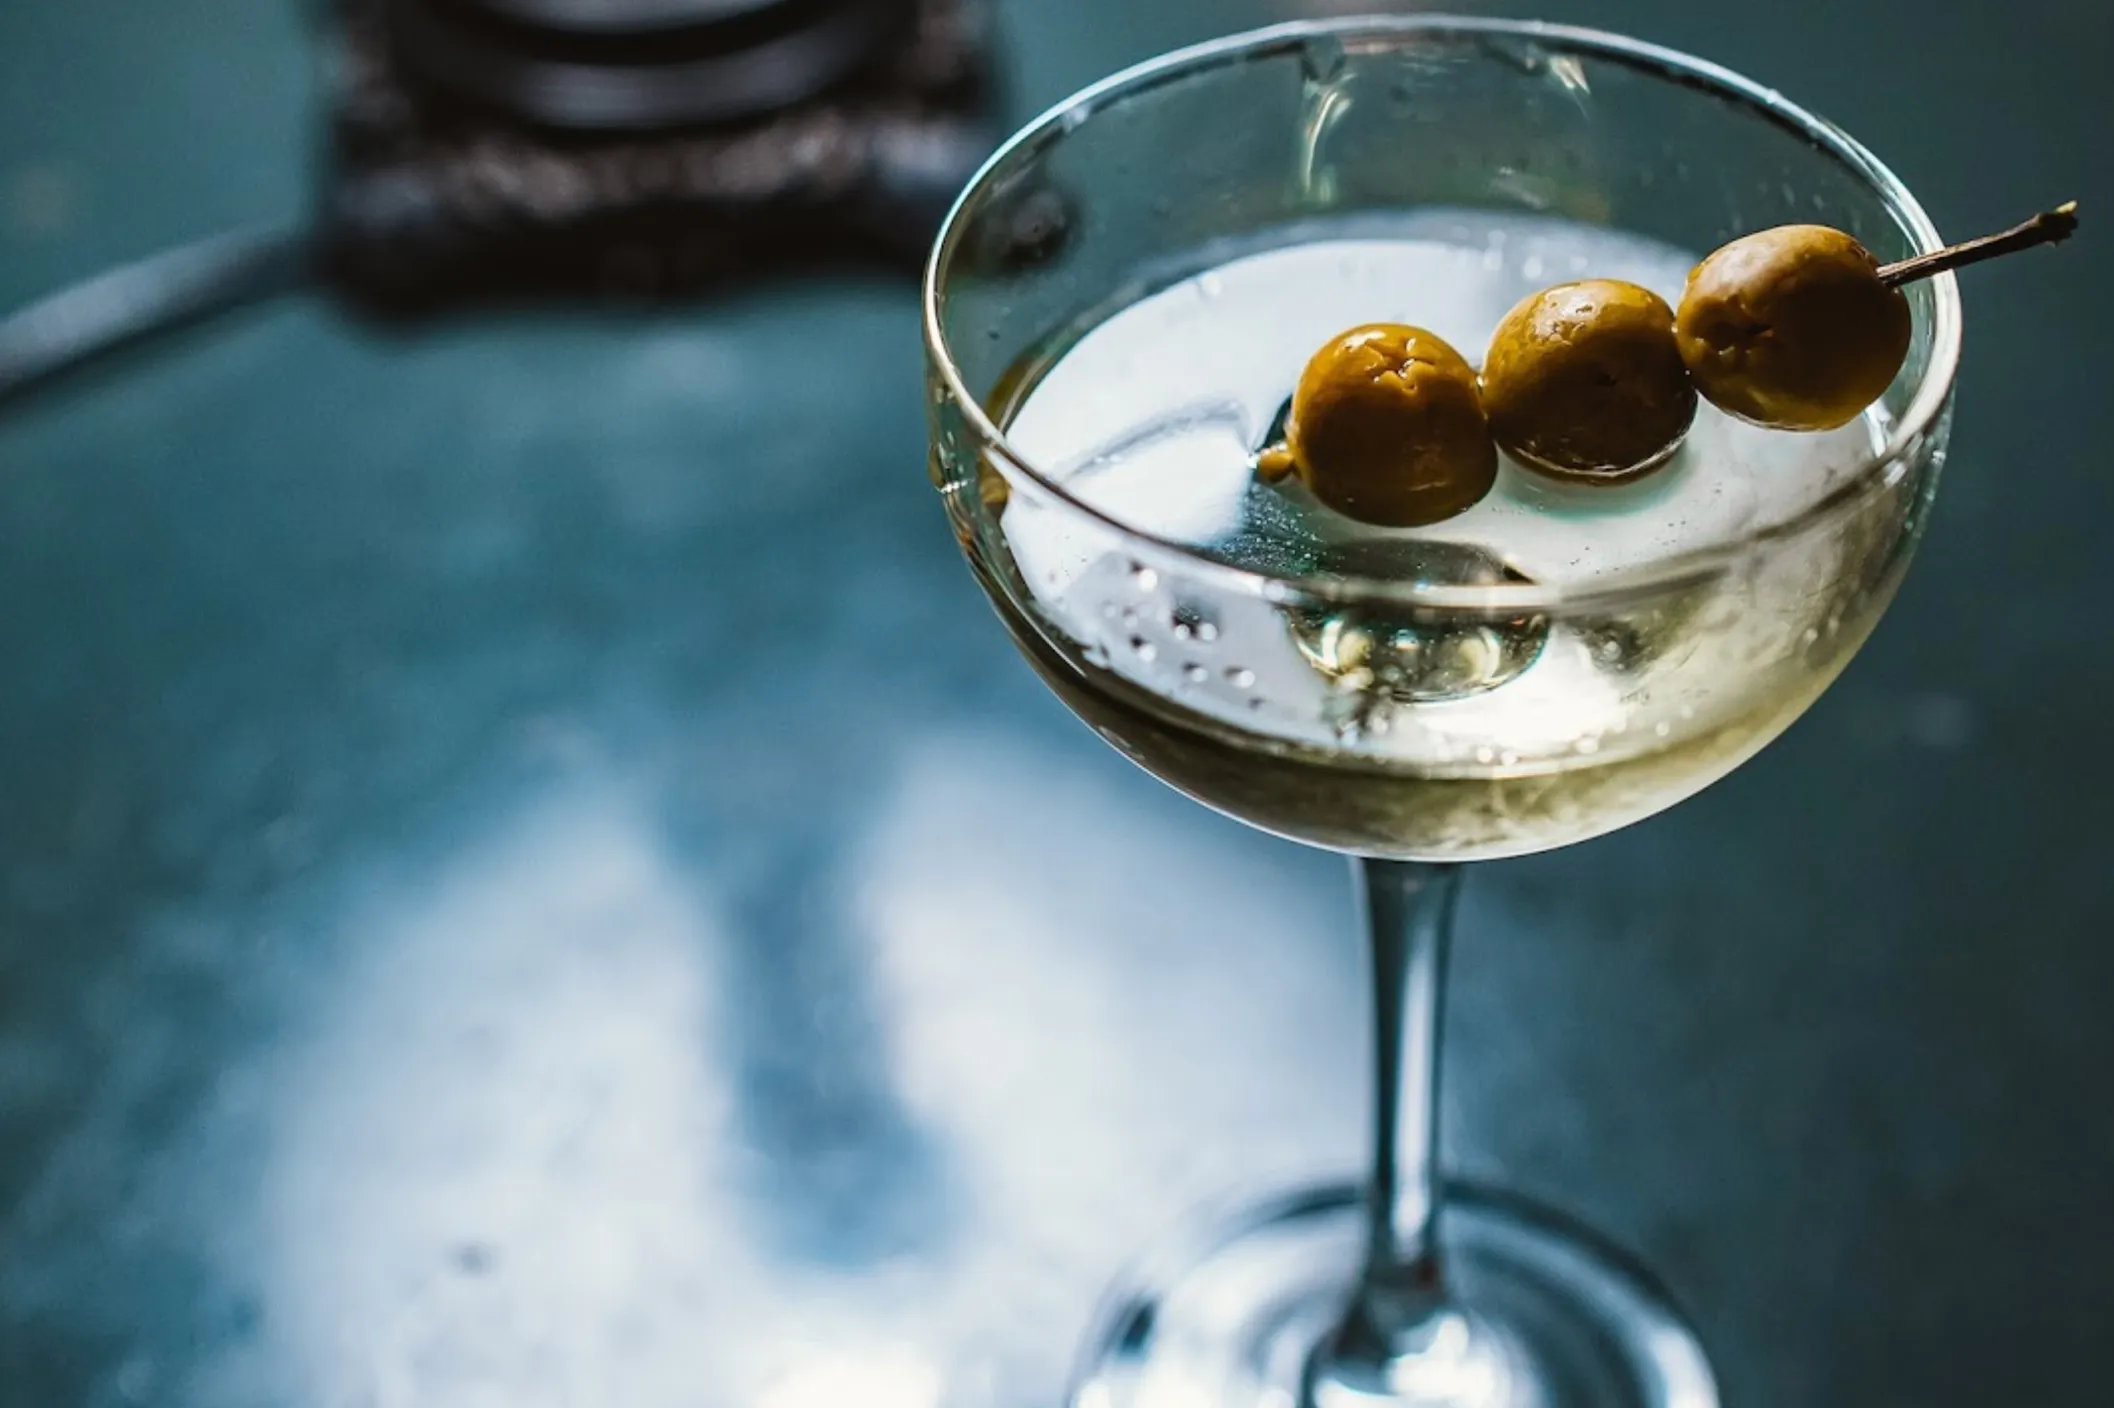 A martini glass holds a vodka martini with three olives on a skewer